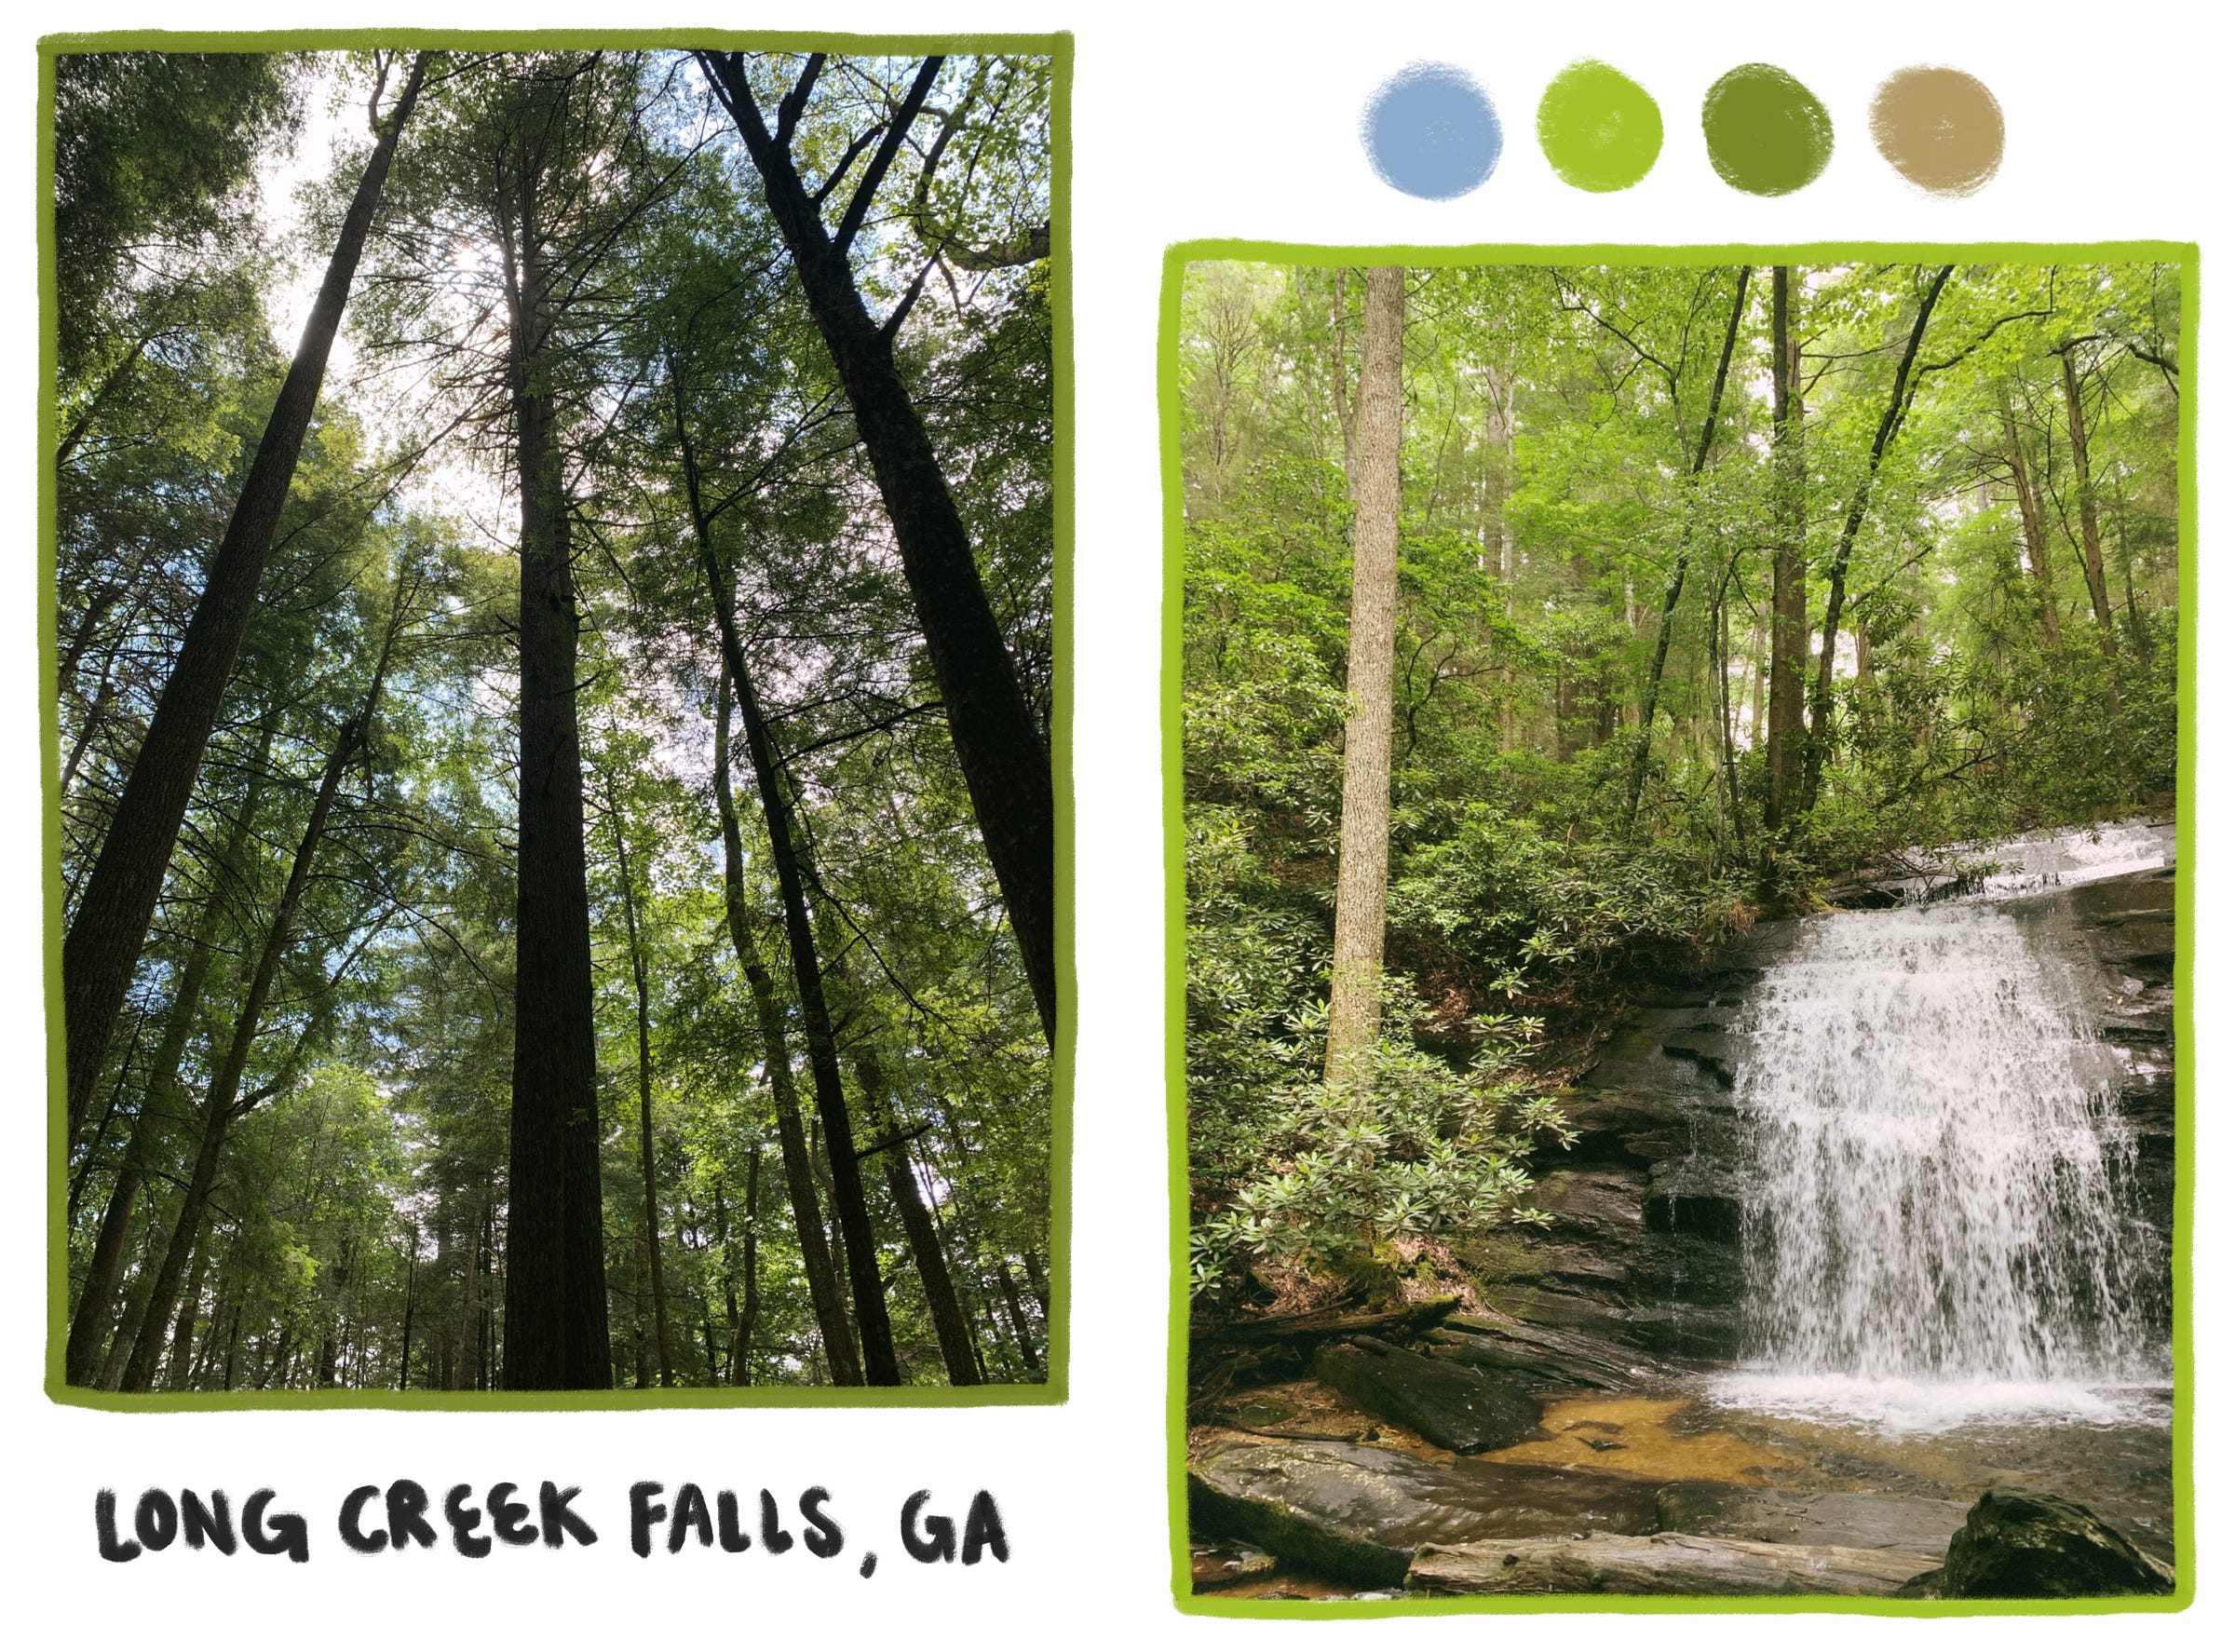 Two photos side by side. On the left, a photo taken looking up at tall trees with the sky in the background. On the left, a picture at the base of Long Creek Falls in Georgia. Lush green is everywhere in both photos.